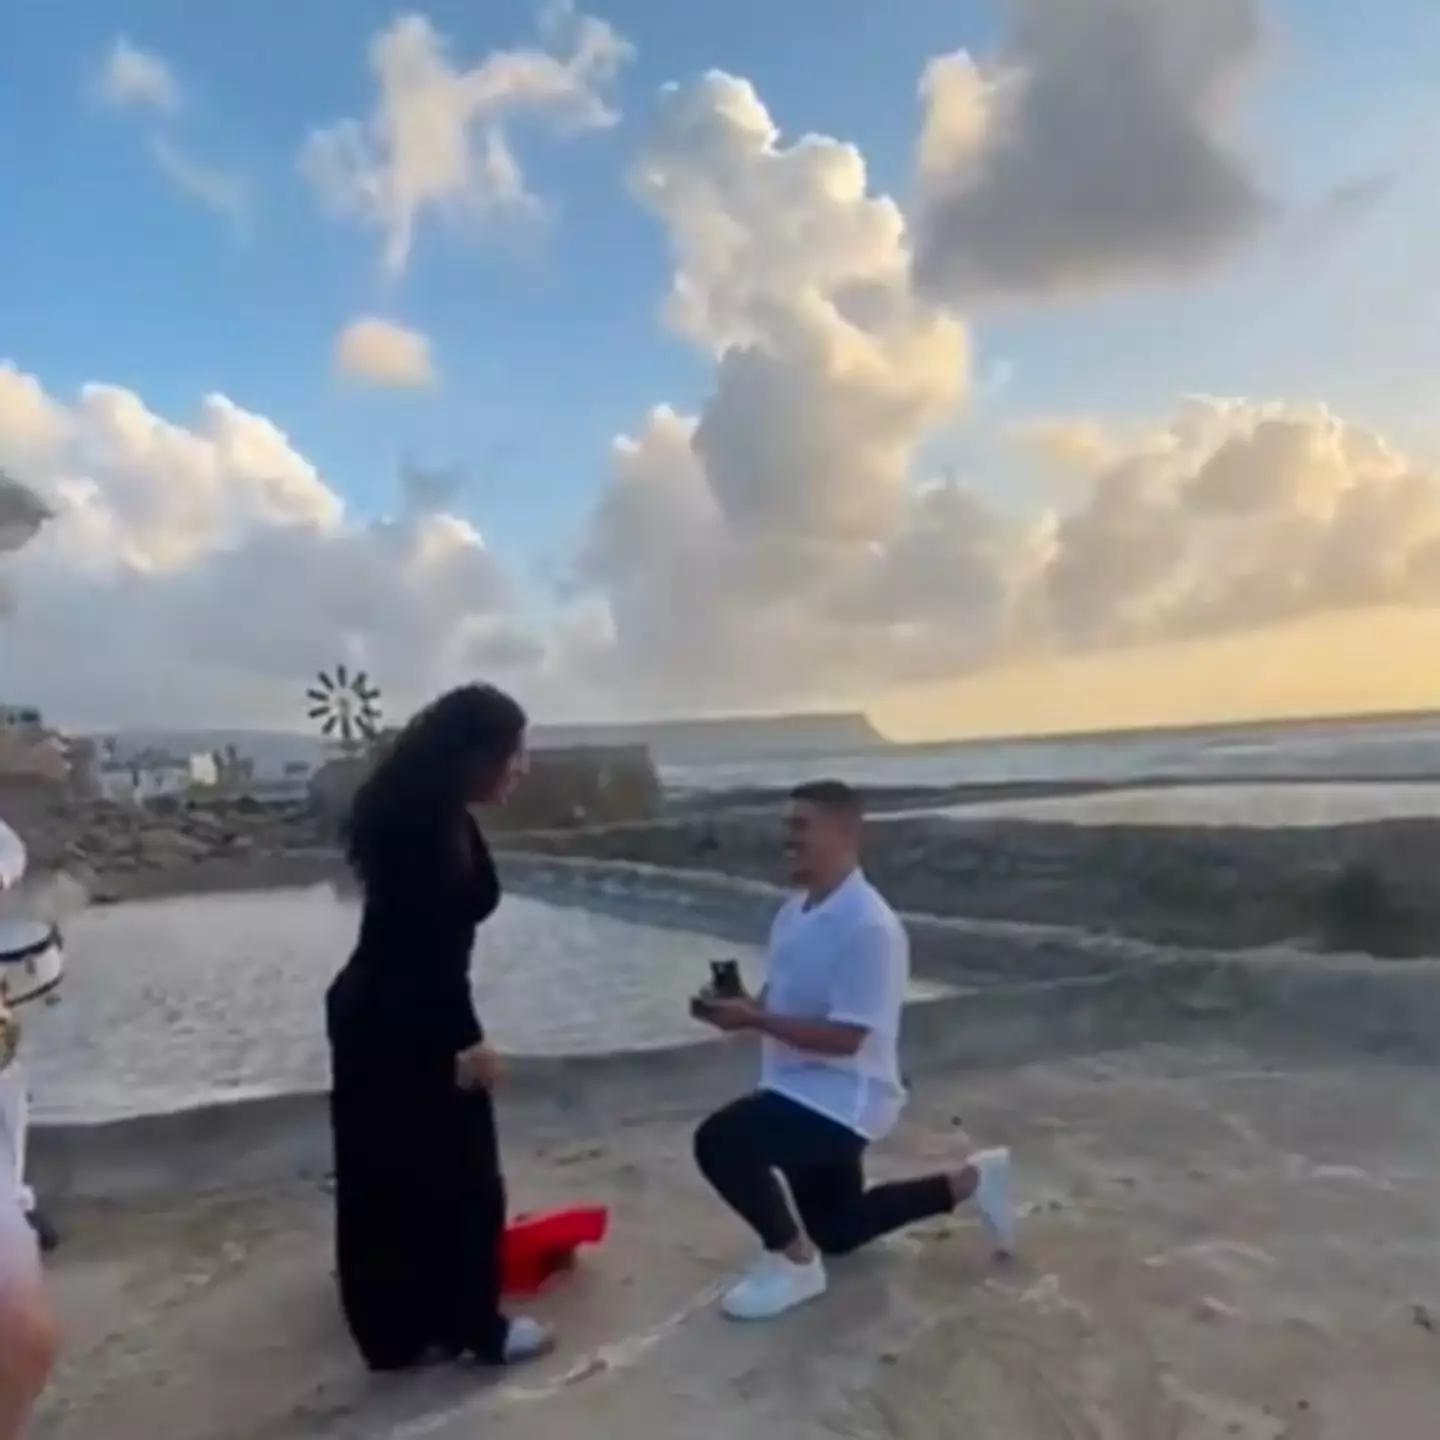 Vanessa Moujalli was proposed to in the most unconventional way.